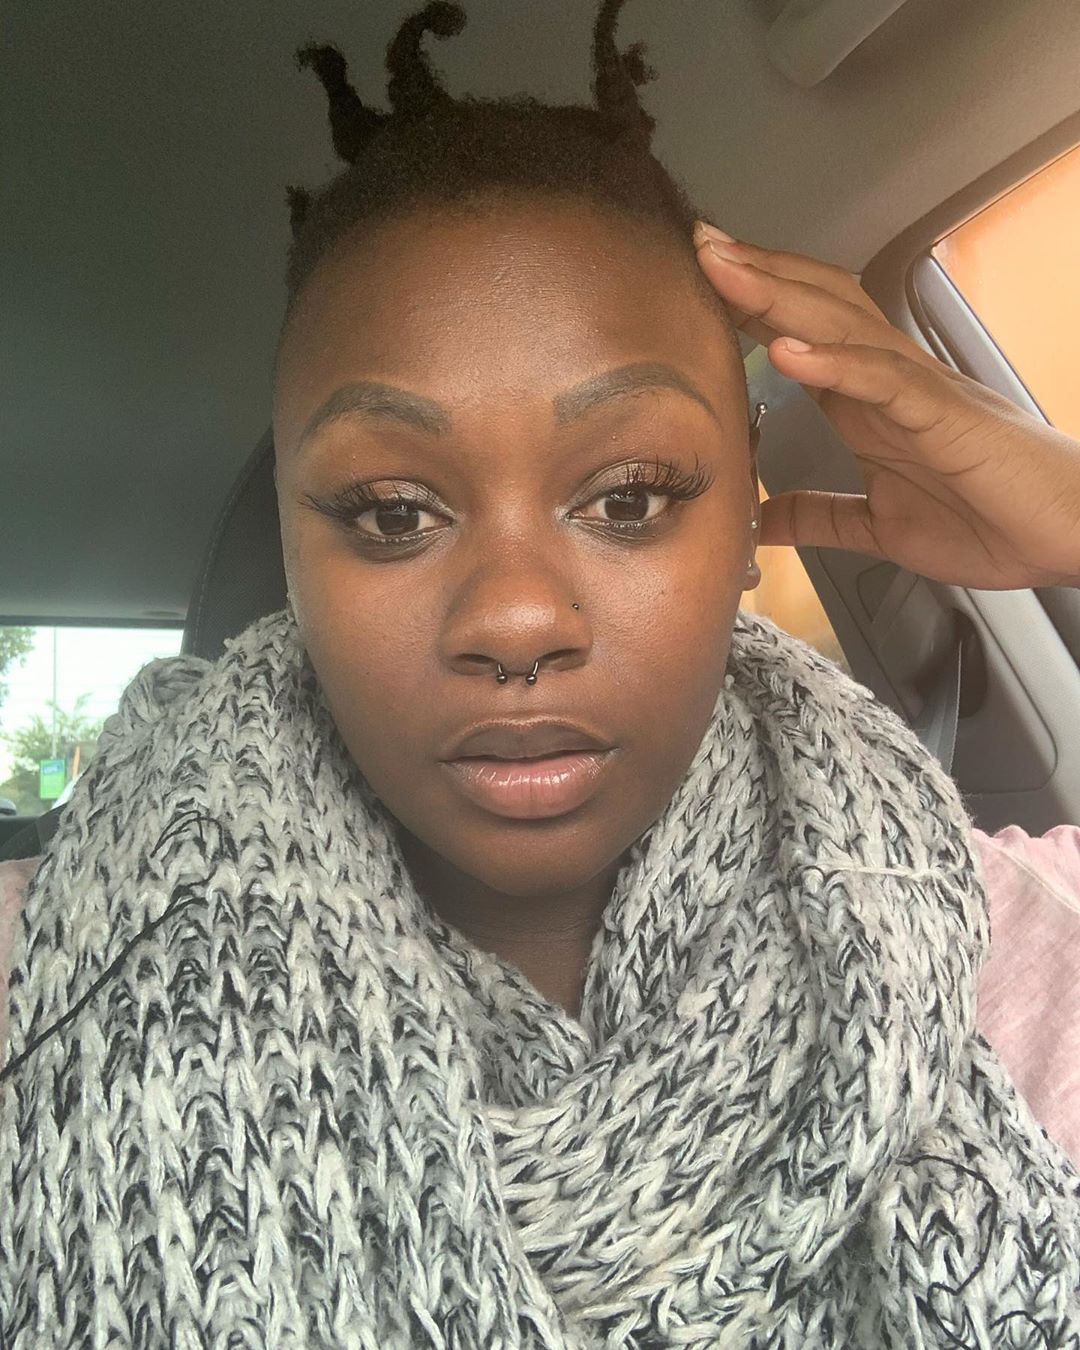 Amanda Black expresses frustration – Things are definitely changing